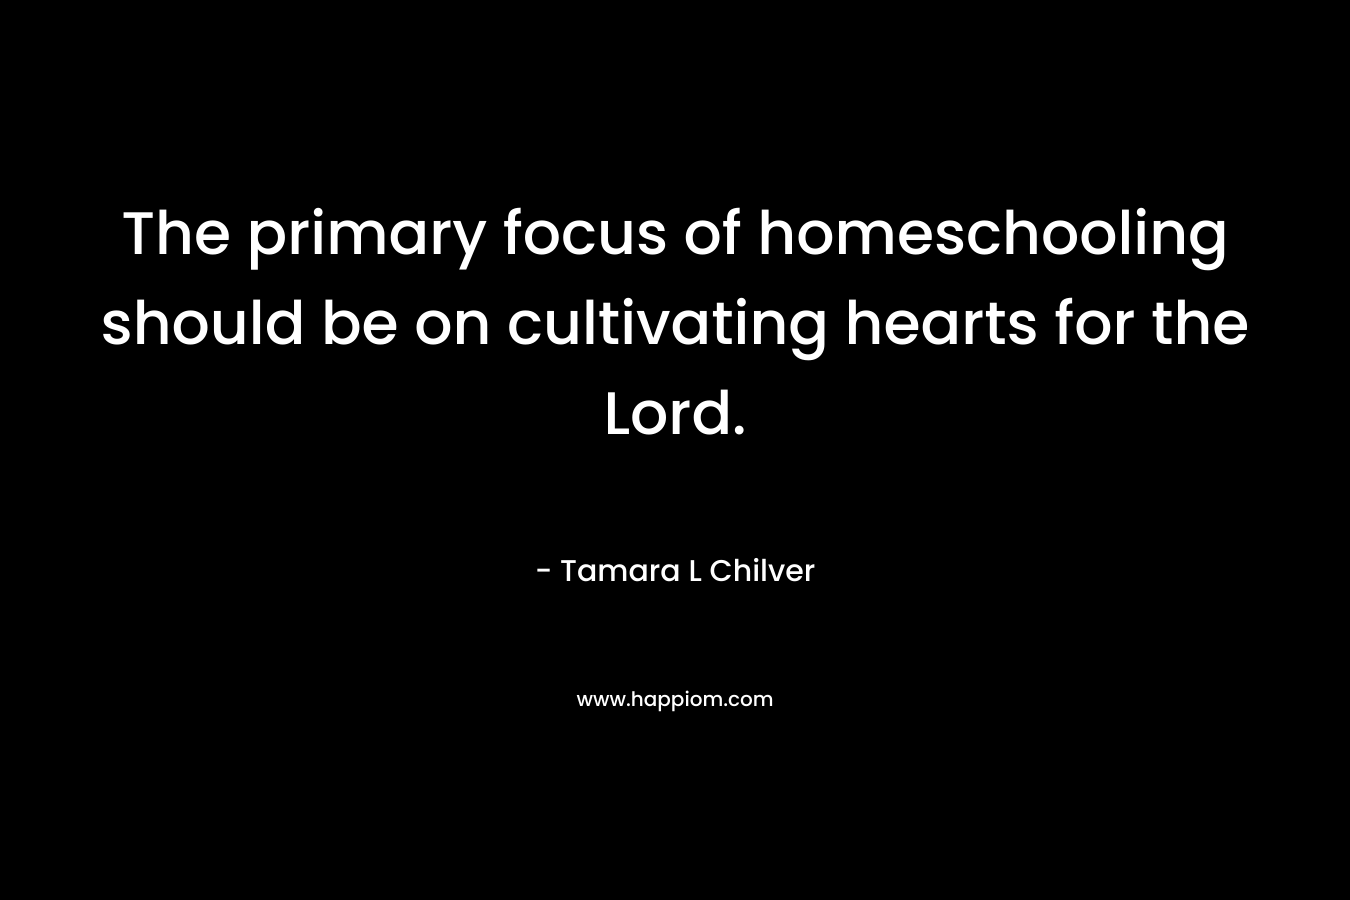 The primary focus of homeschooling should be on cultivating hearts for the Lord.